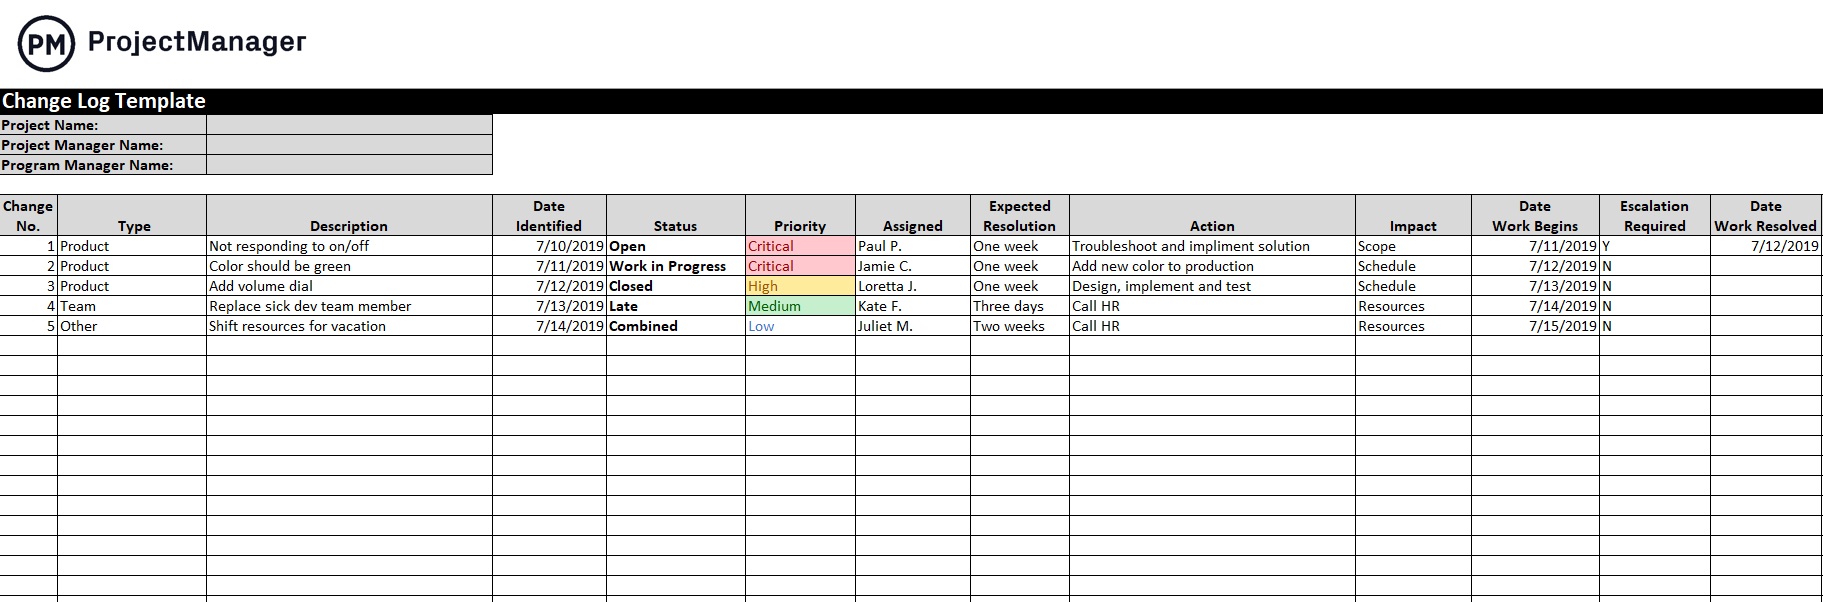 ProjectManager's free change log template